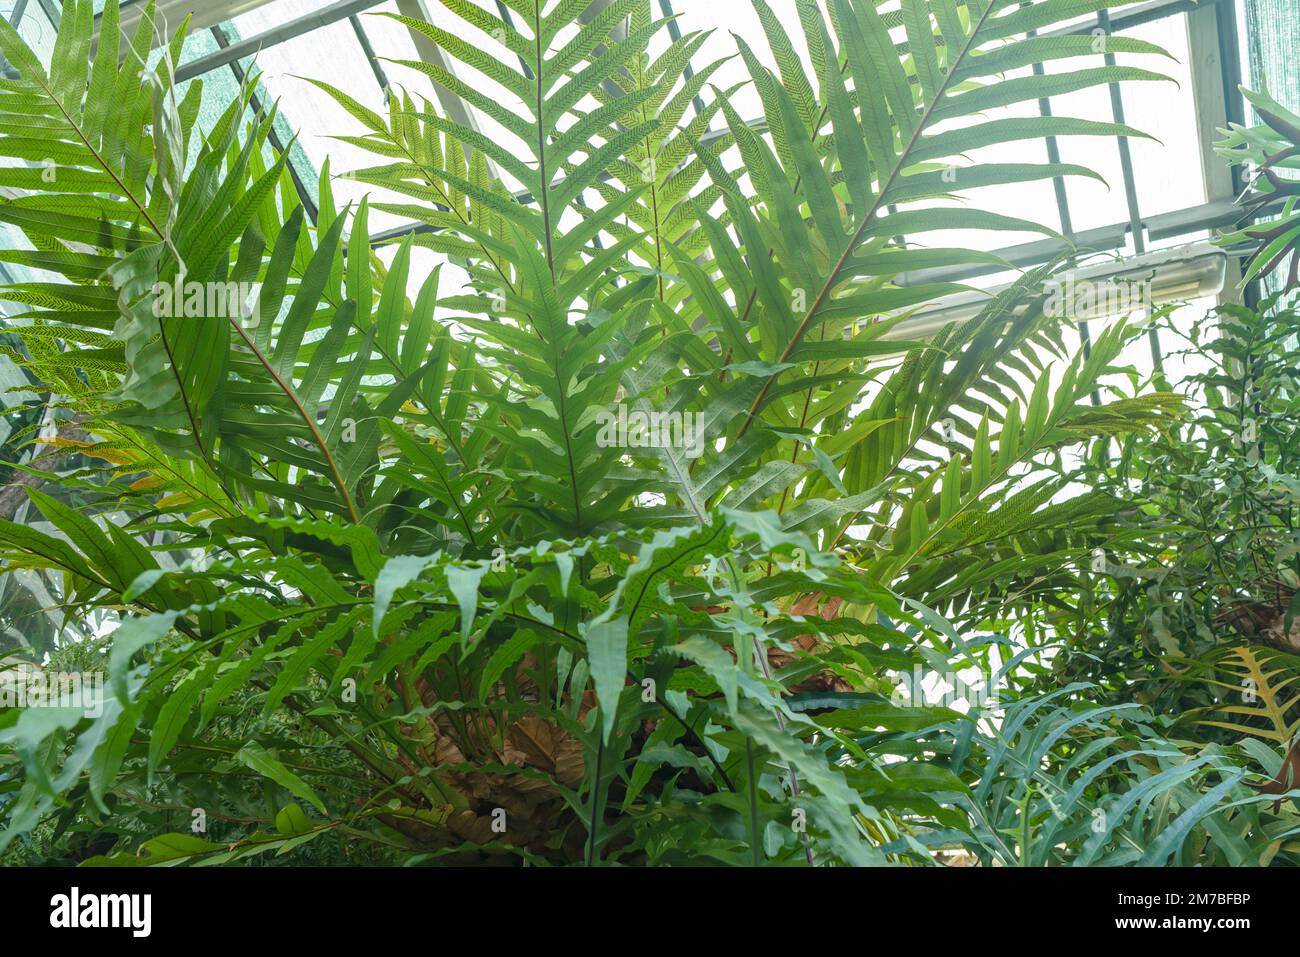 view from below on leaves of growing drynaria fern Stock Photo